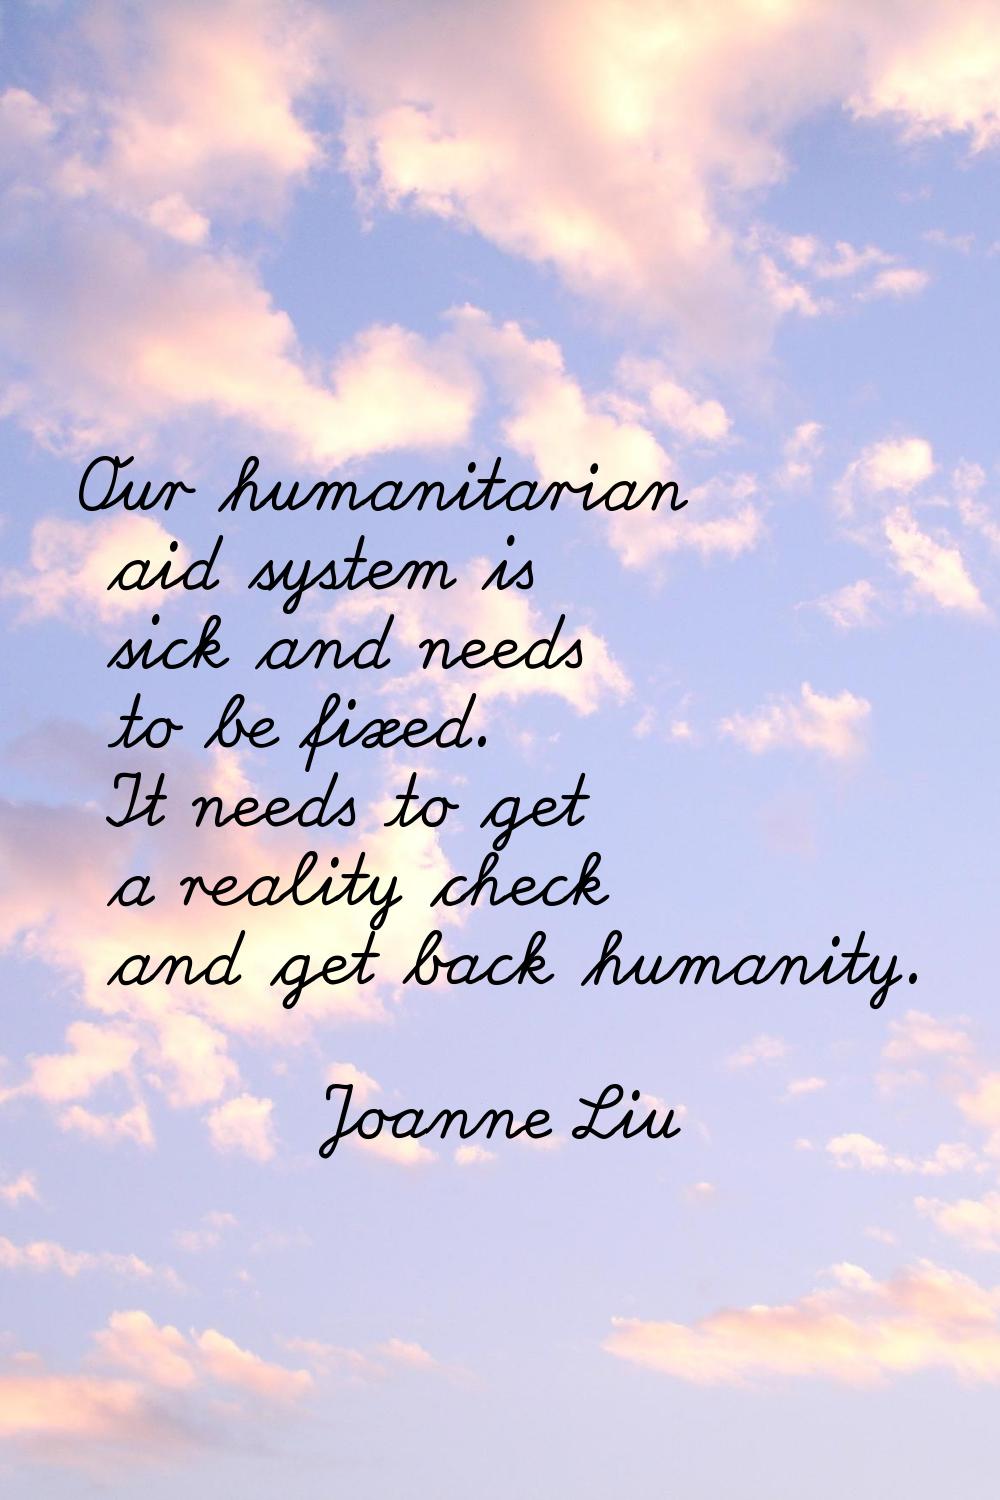 Our humanitarian aid system is sick and needs to be fixed. It needs to get a reality check and get 